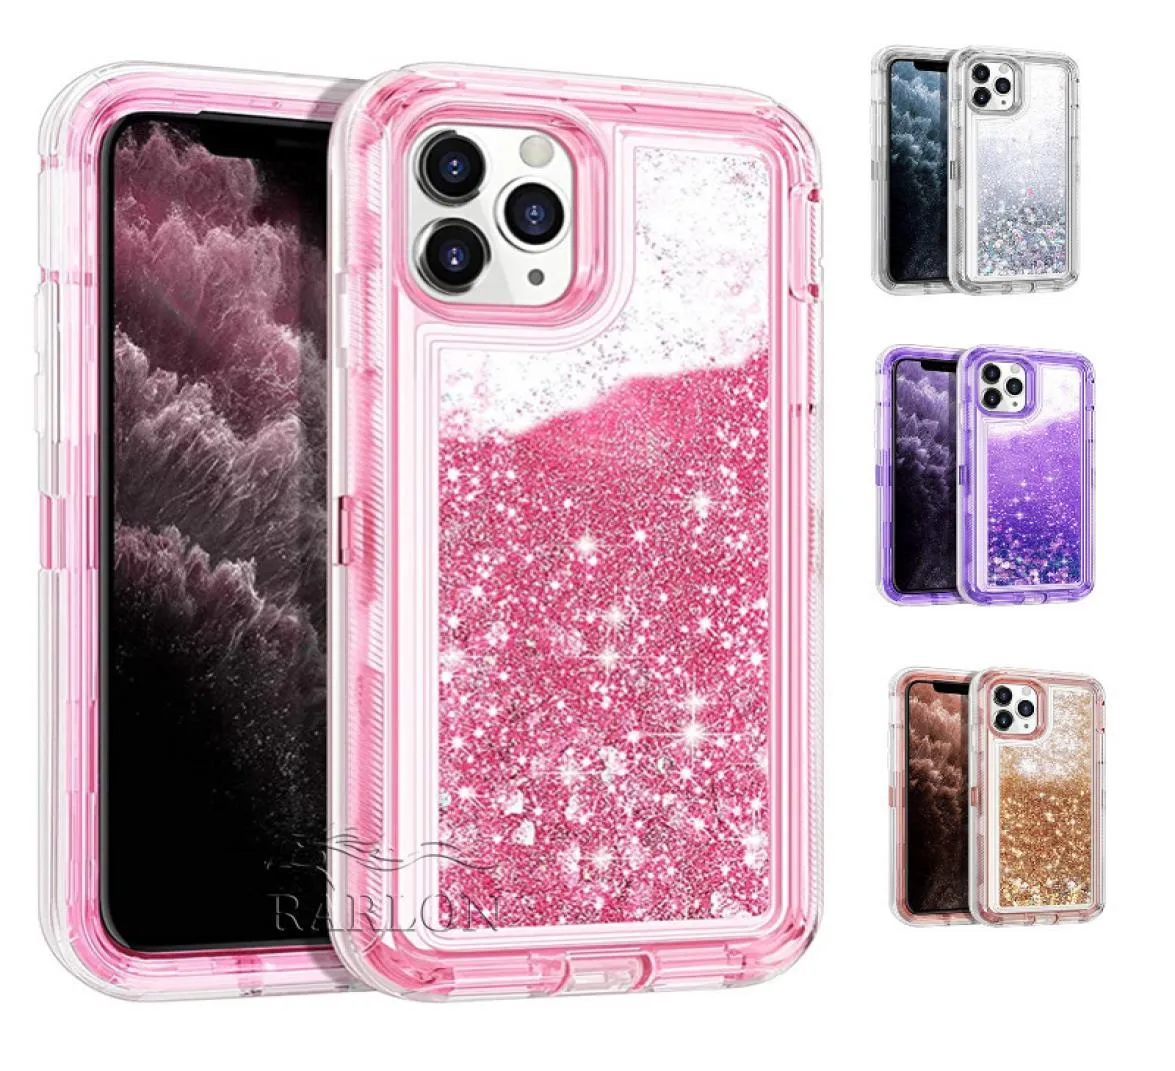 Liquid Bling Cases Waterfall Glitter Heavy Duty Shiny Bumper Clear Rubber Defender Cover for iPhone 14 Pro Max 13 12 Mini 11 XS 7 2679760